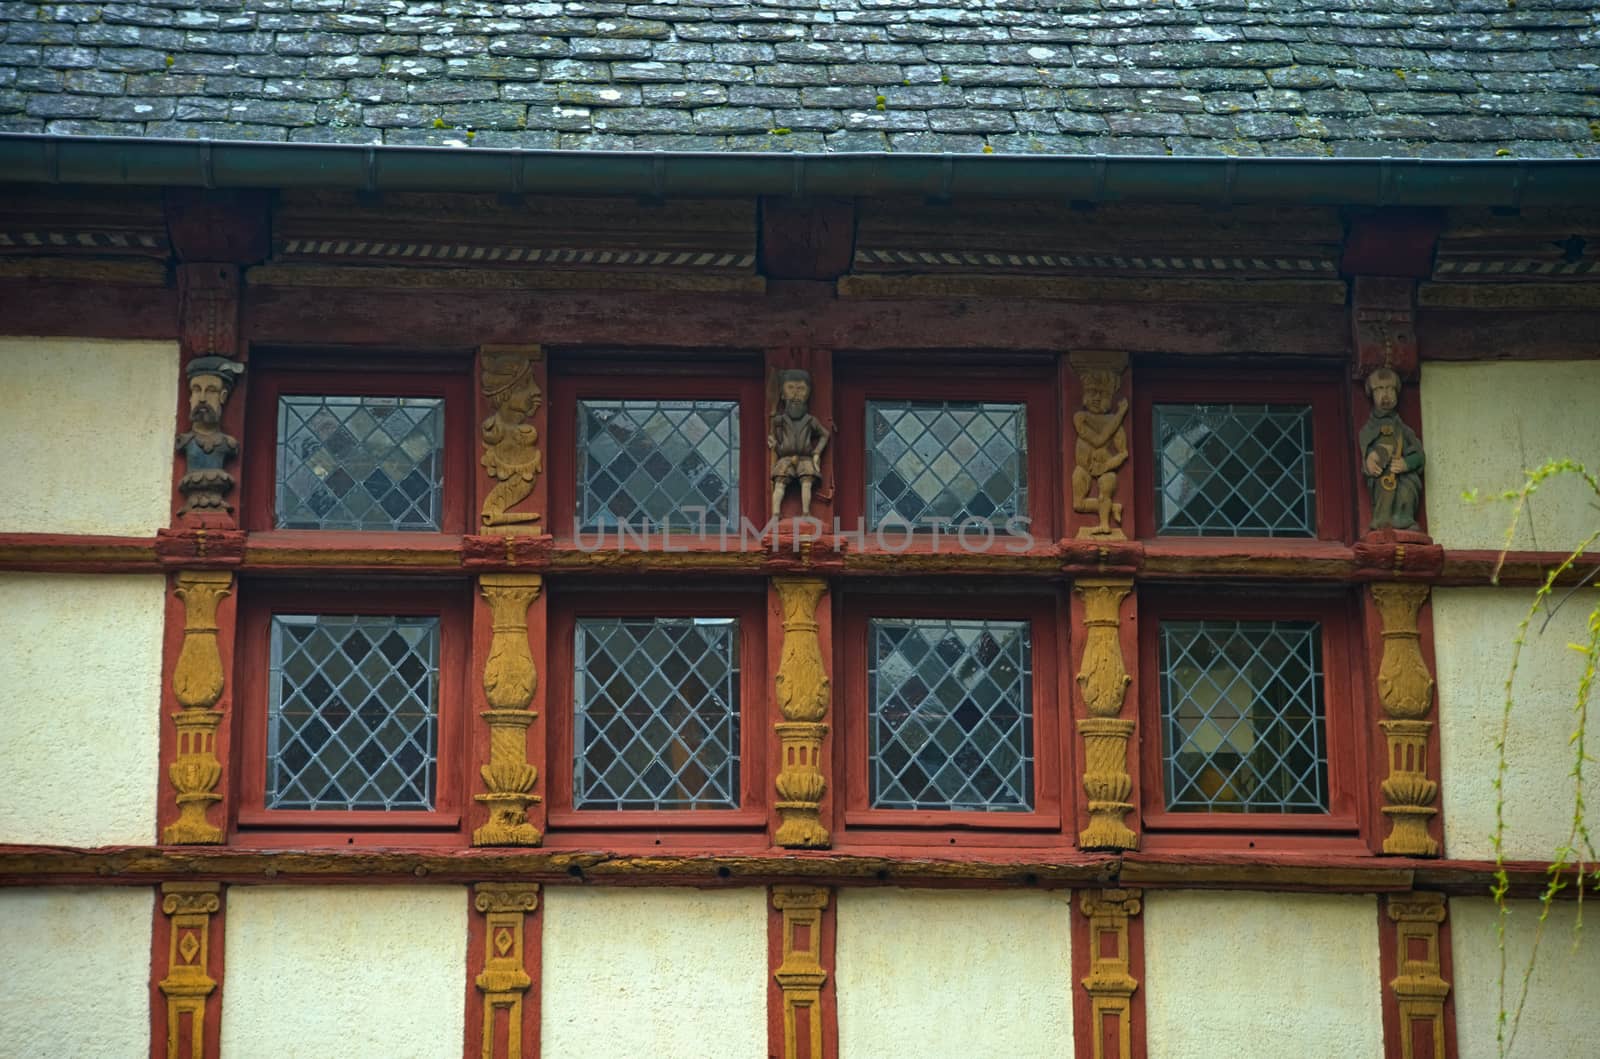 Windows and facade on medieval house in Dinon, France by sheriffkule